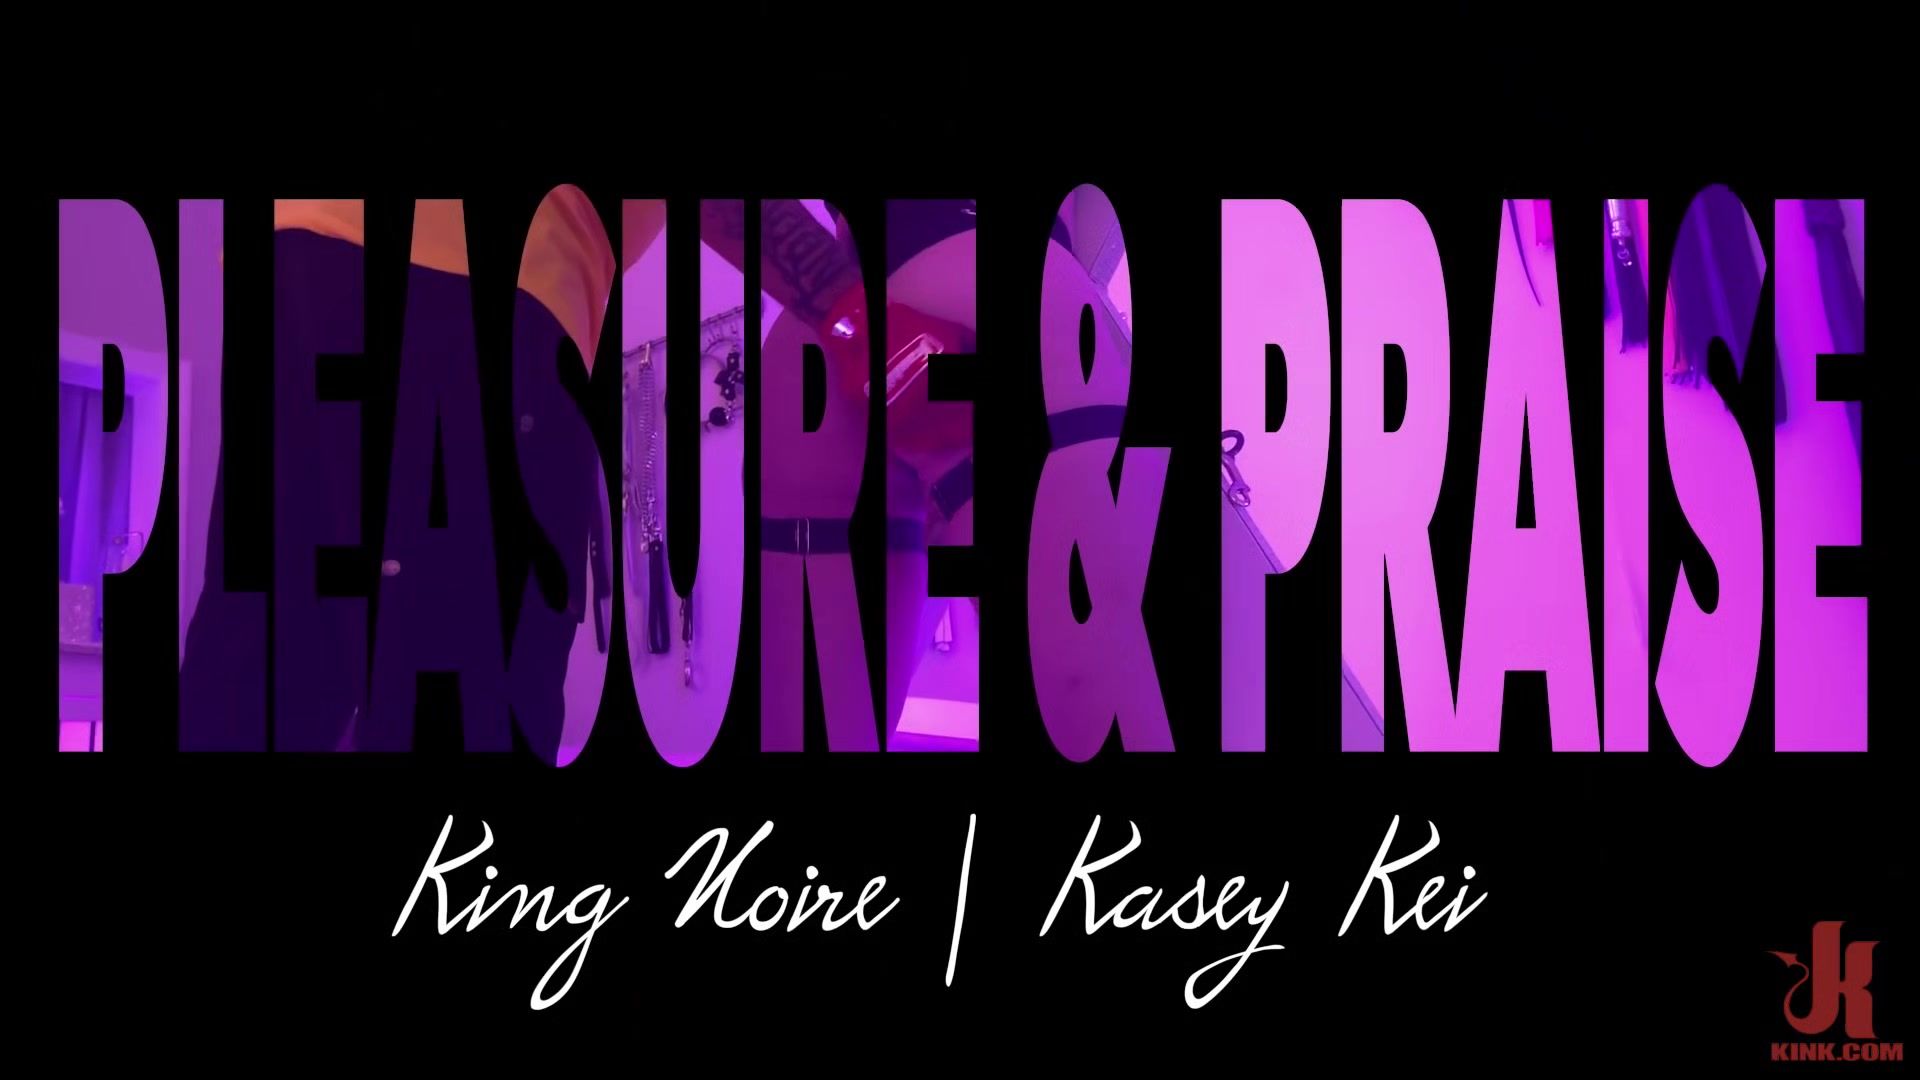 Free Amature King Noire And Kasey Kei - Pleasure & Praise Dominated By Head